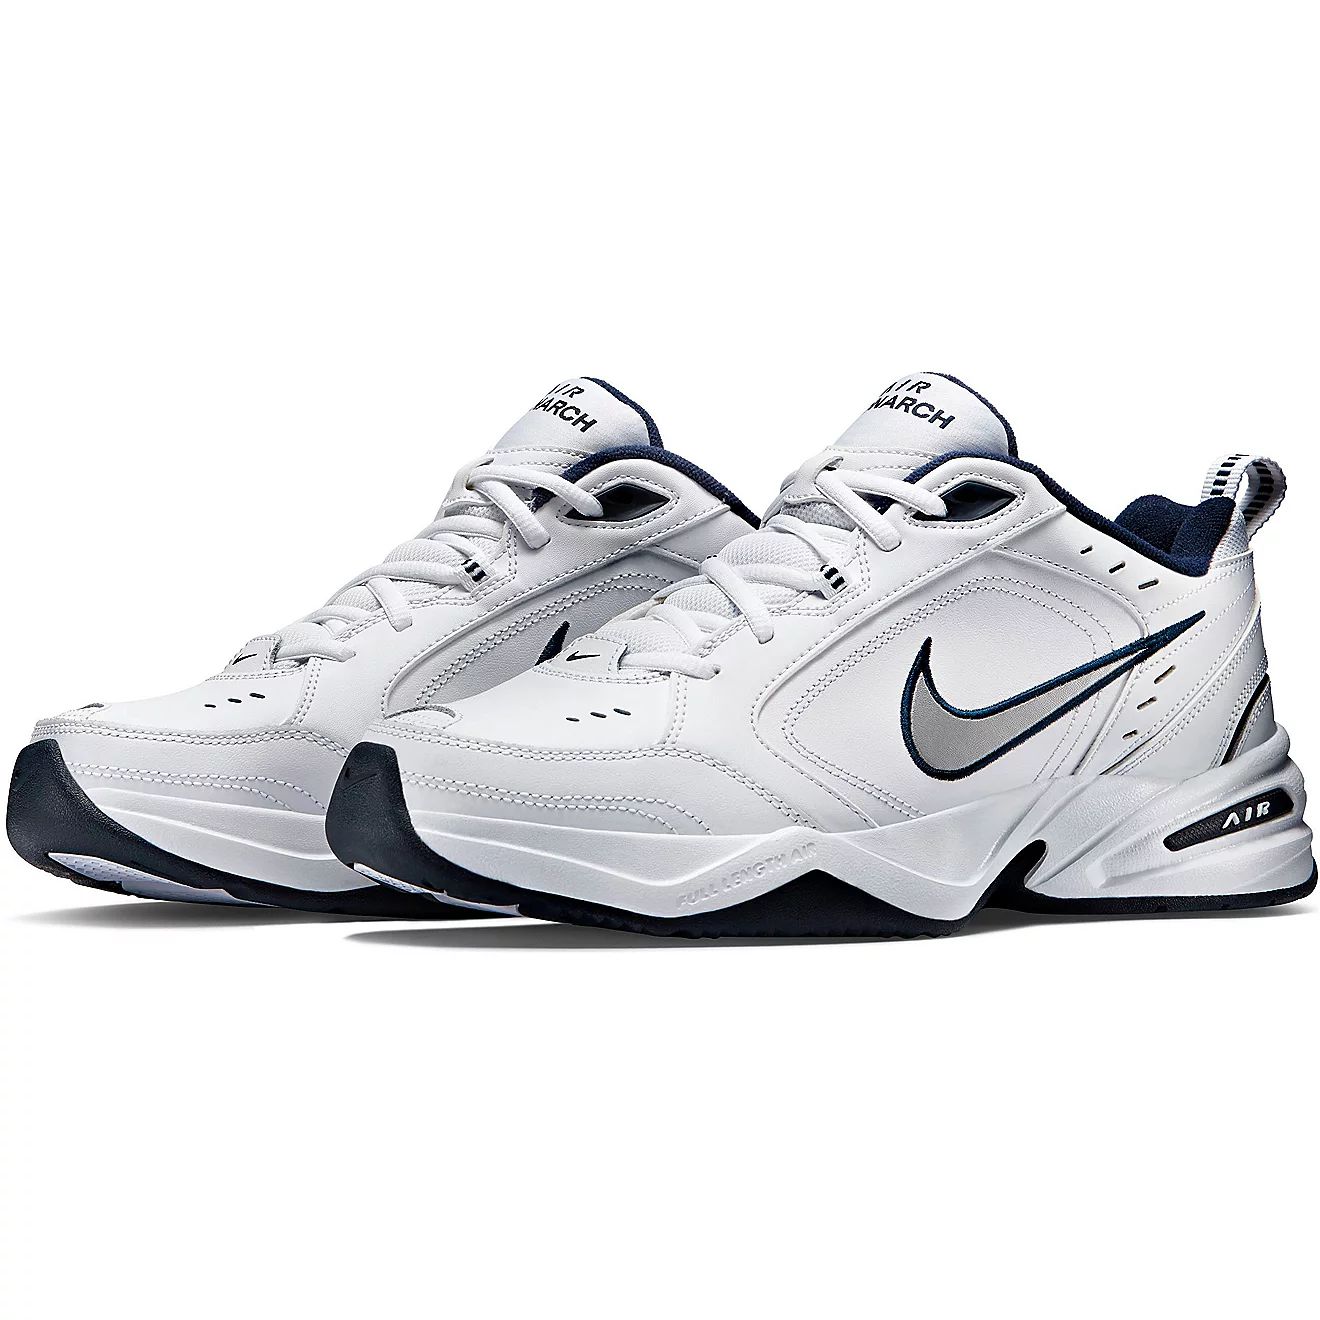 Nike Men's Air Monarch IV Lightweight Training Shoes | Academy | Academy Sports + Outdoors